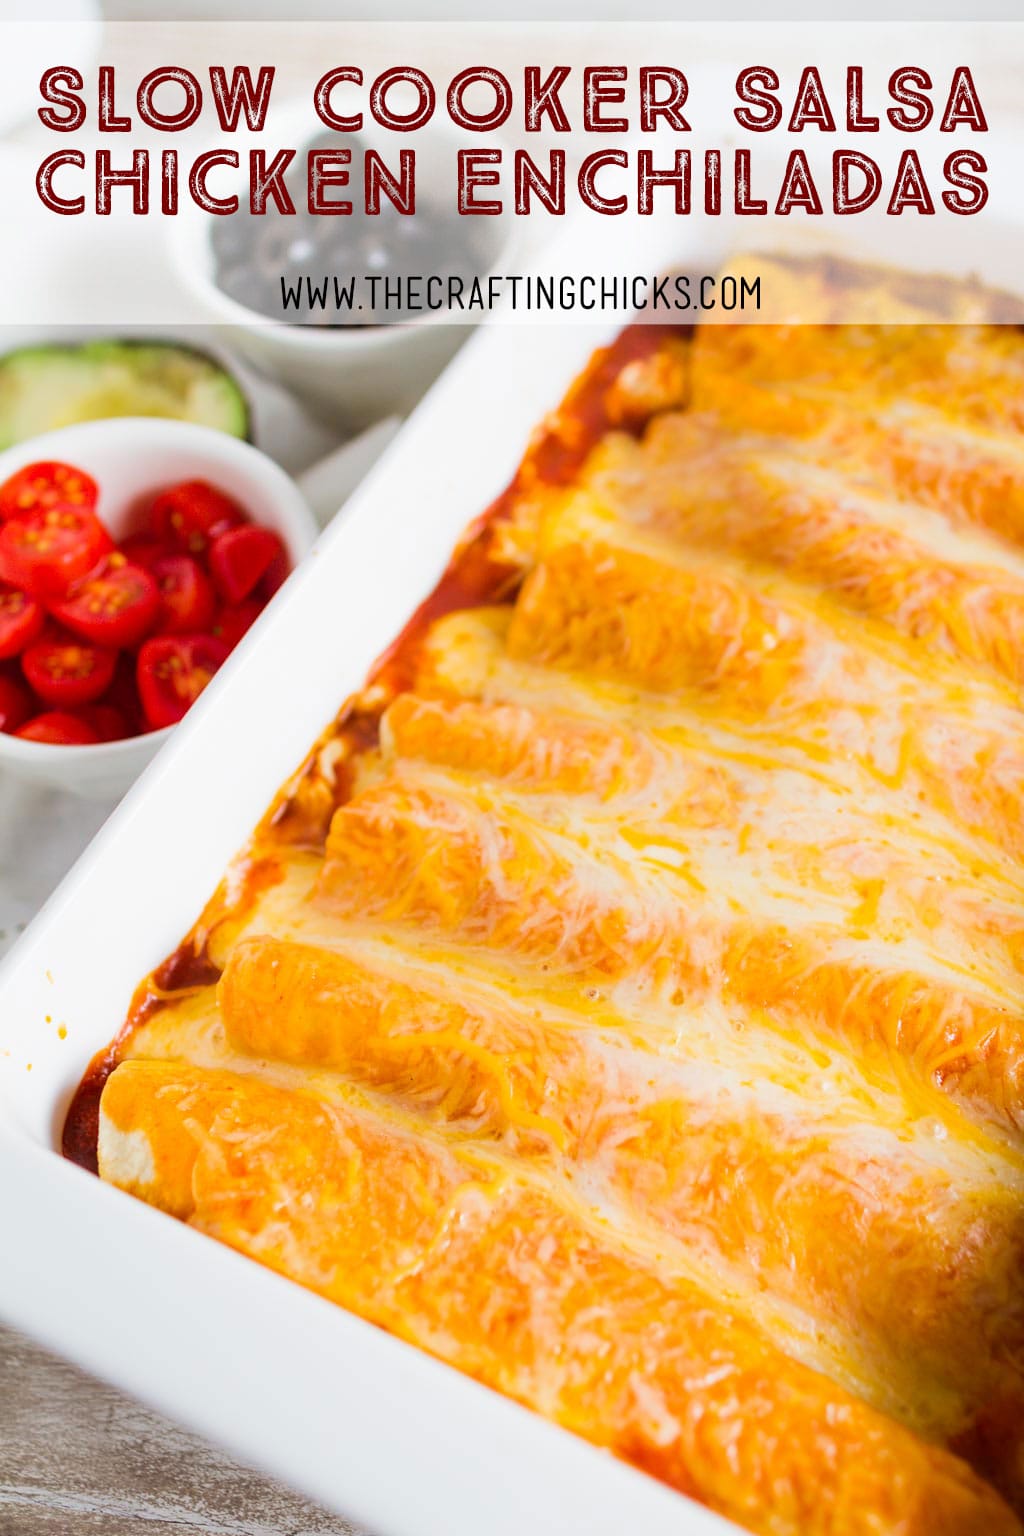 Slow Cooker Salsa Chicken Enchiladas - If you are needing a fix it and forget it dinner idea, Crock Pot Salsa Chicken Enchiladas is the one for you. This recipe is delicious and flavorful.